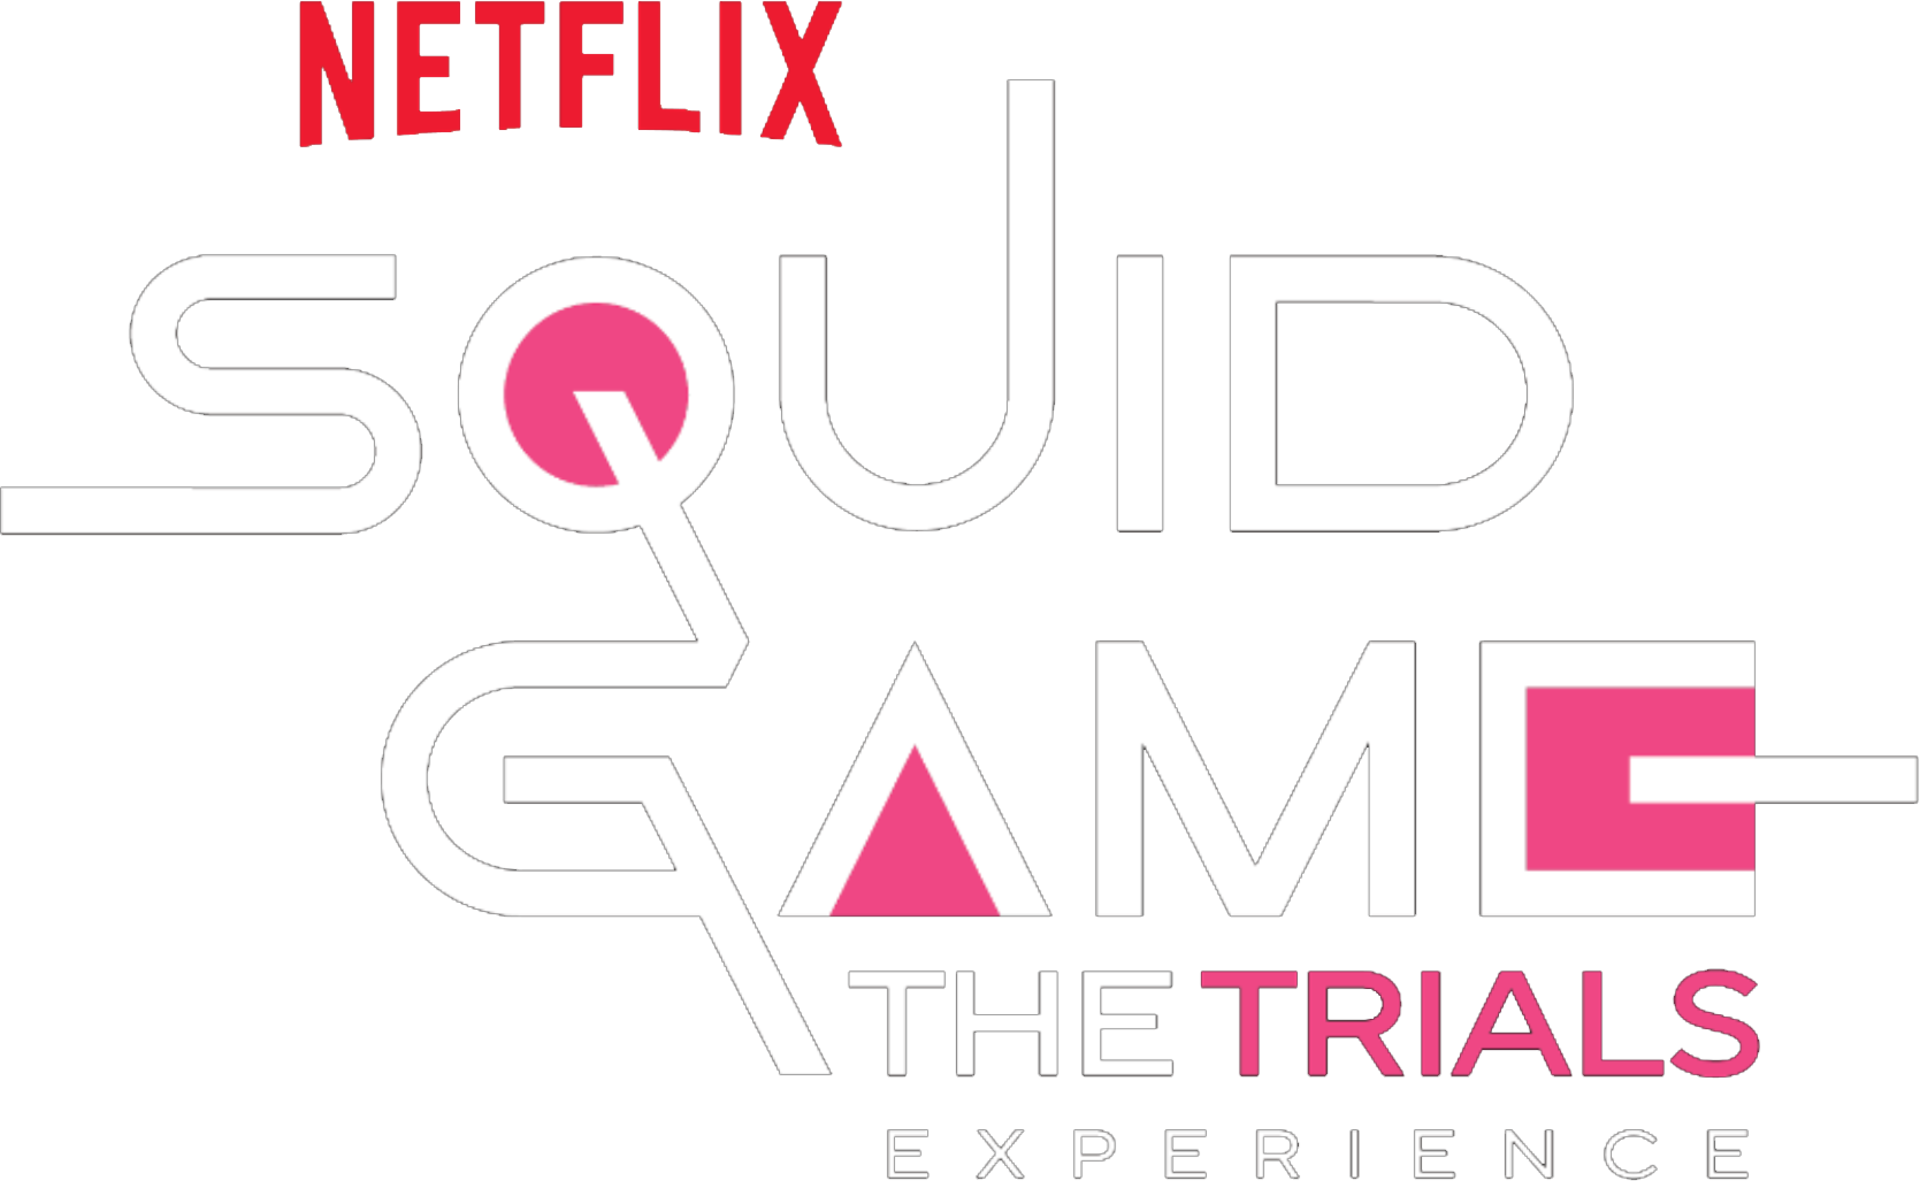 Squid Game: The Challenge rules, games and prize fully explained